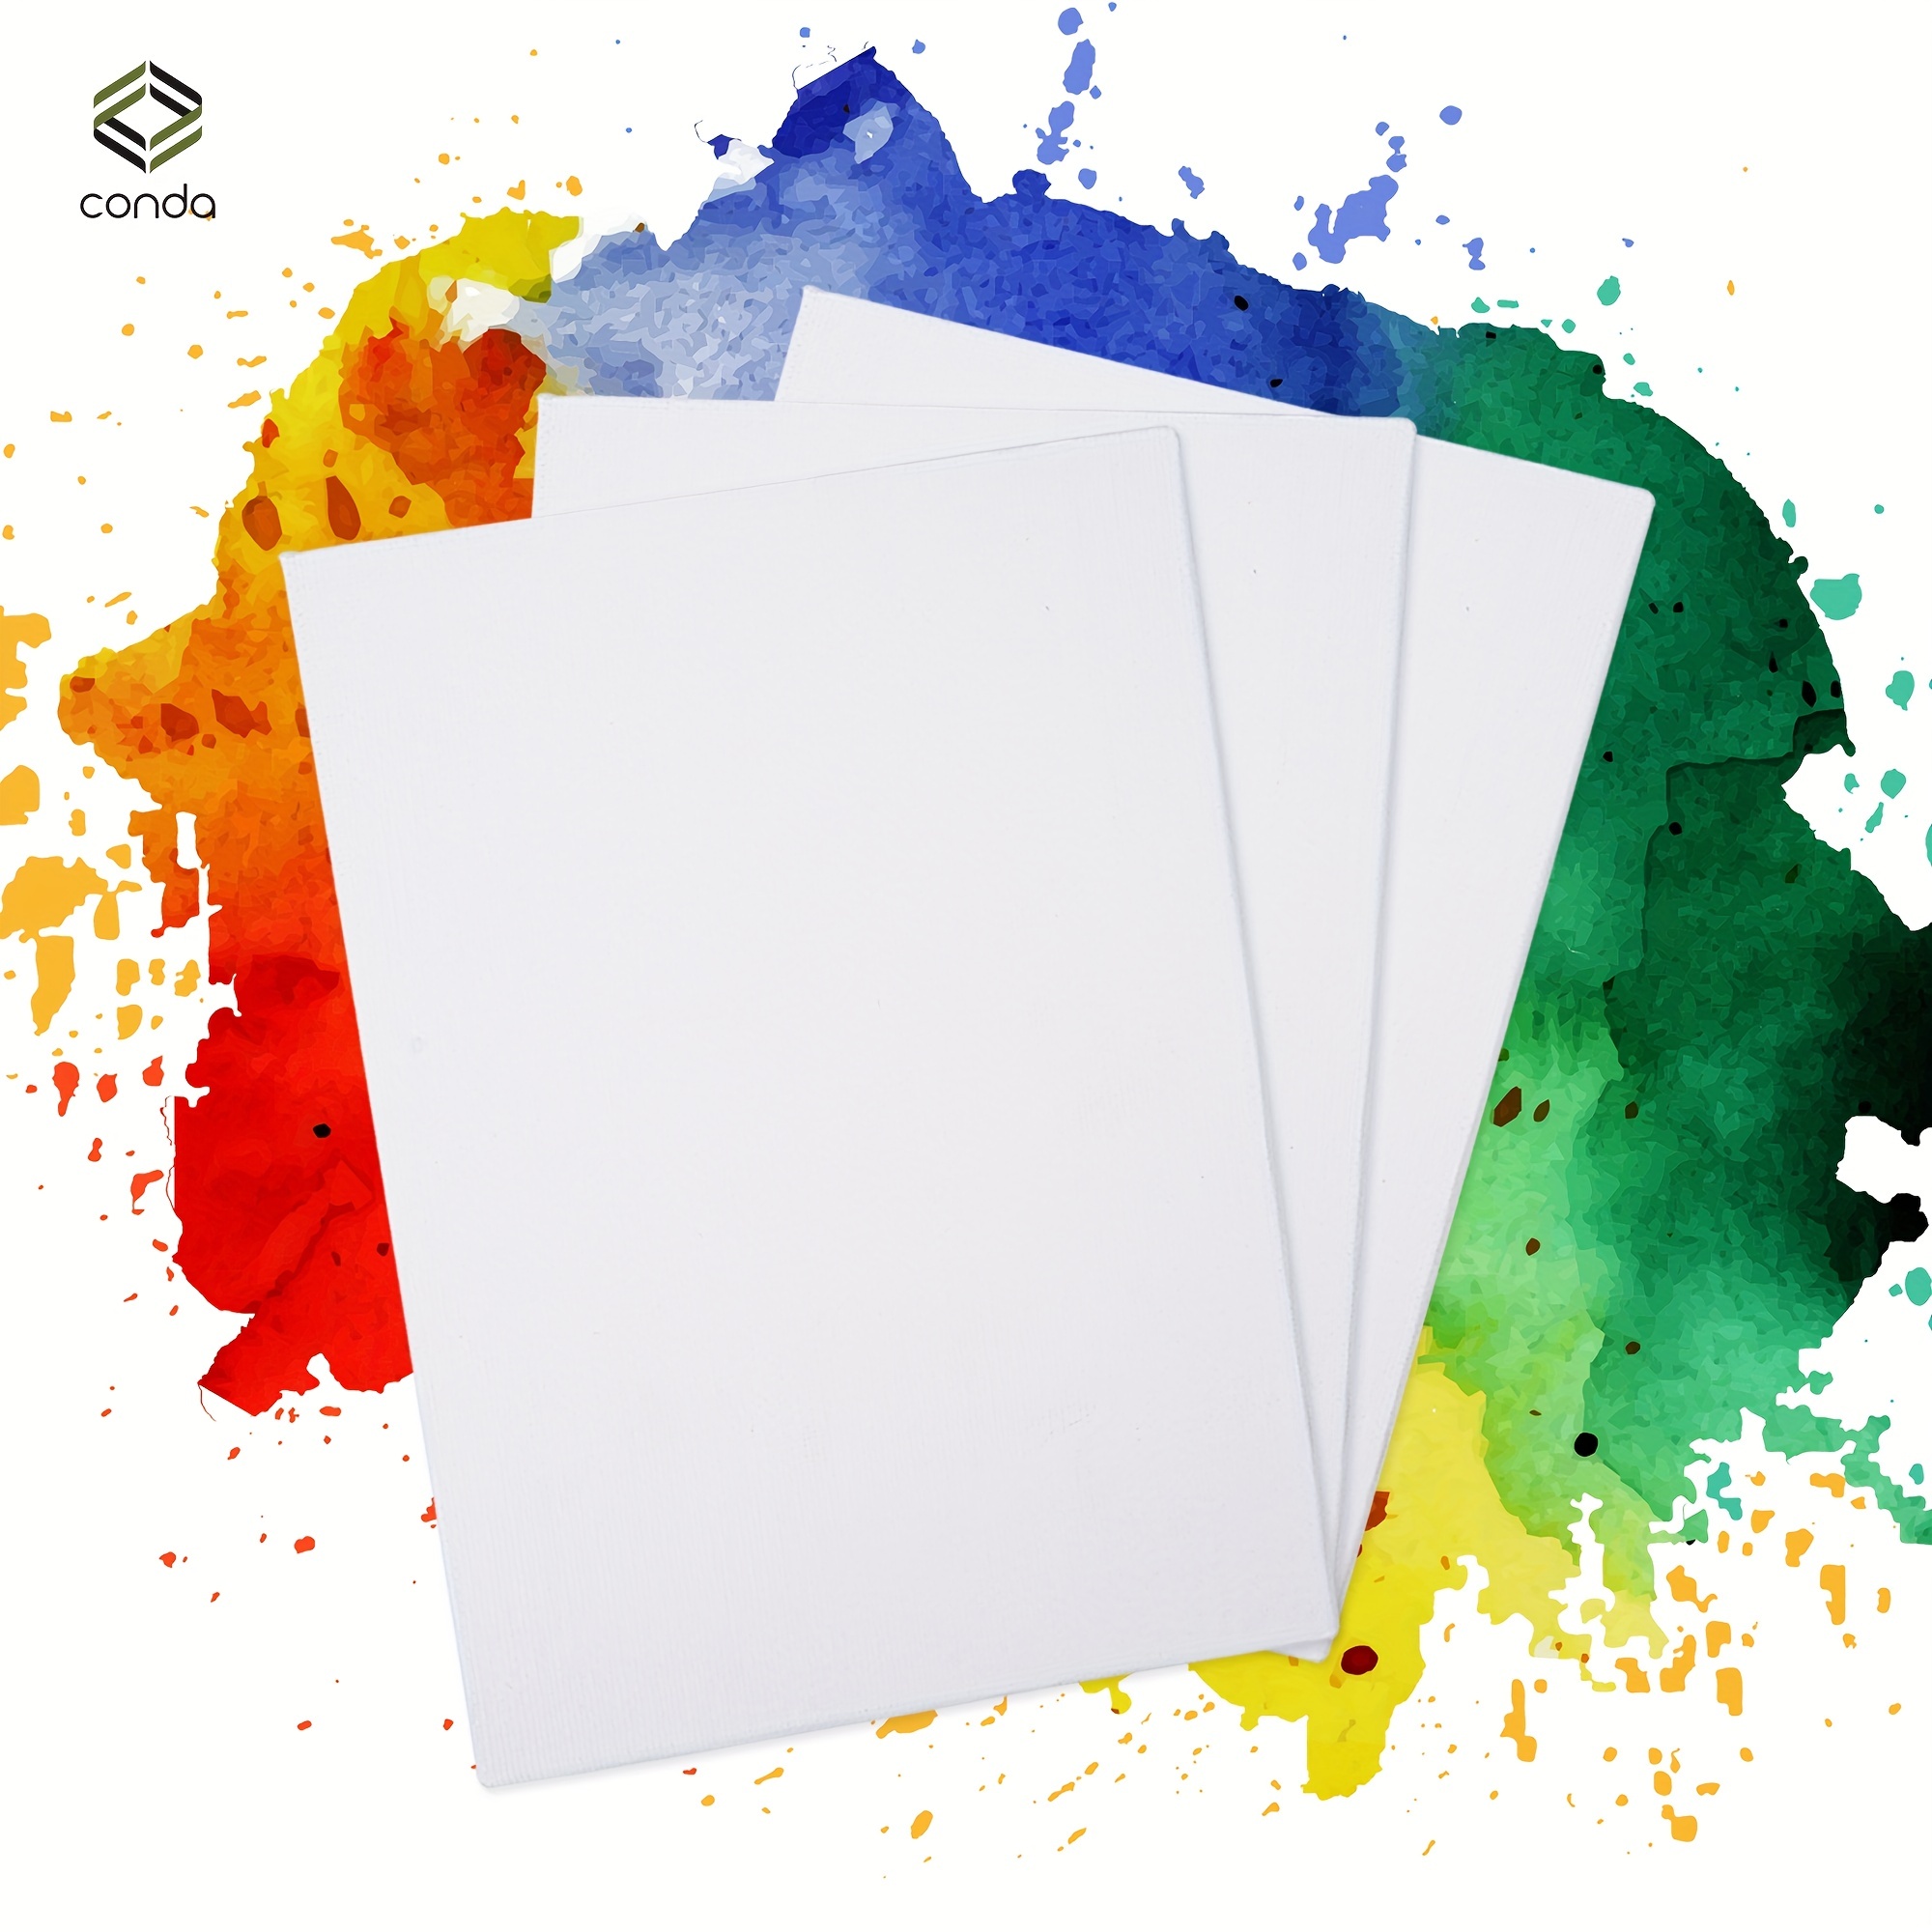 Canvas Panels 12 Pack 8x10 inch, 100% Cotton 12.3 oz Triple Primed Canvases for Painting, Acid-Free Flat Thin Canvas Blank Art Canvas Boards for